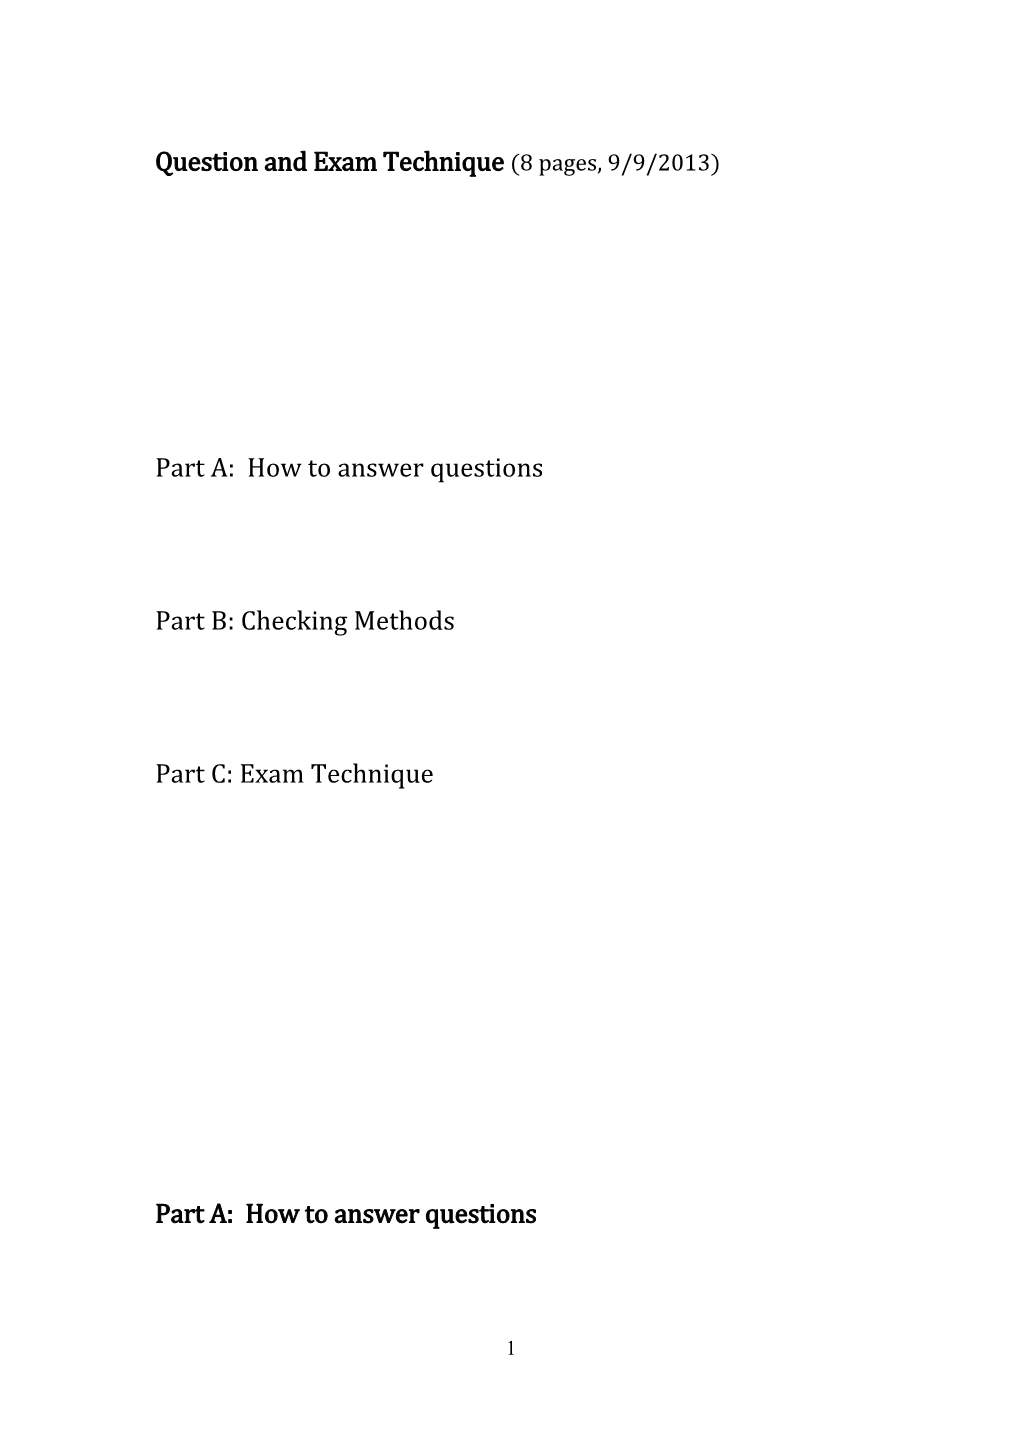 Question and Exam Technique (8 Pages, 9/9/2013)